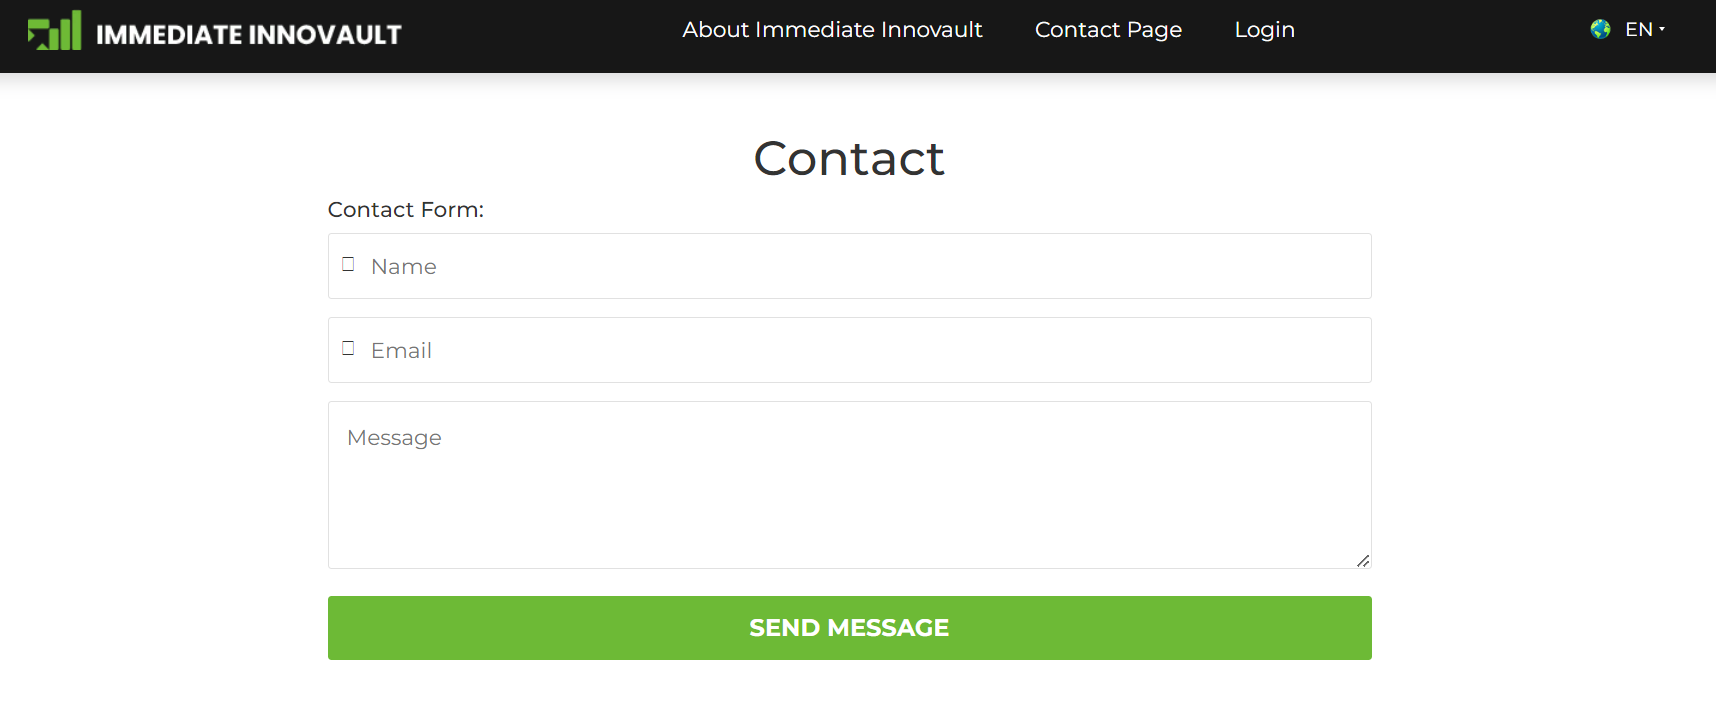 Immediate Innovault Contact Page